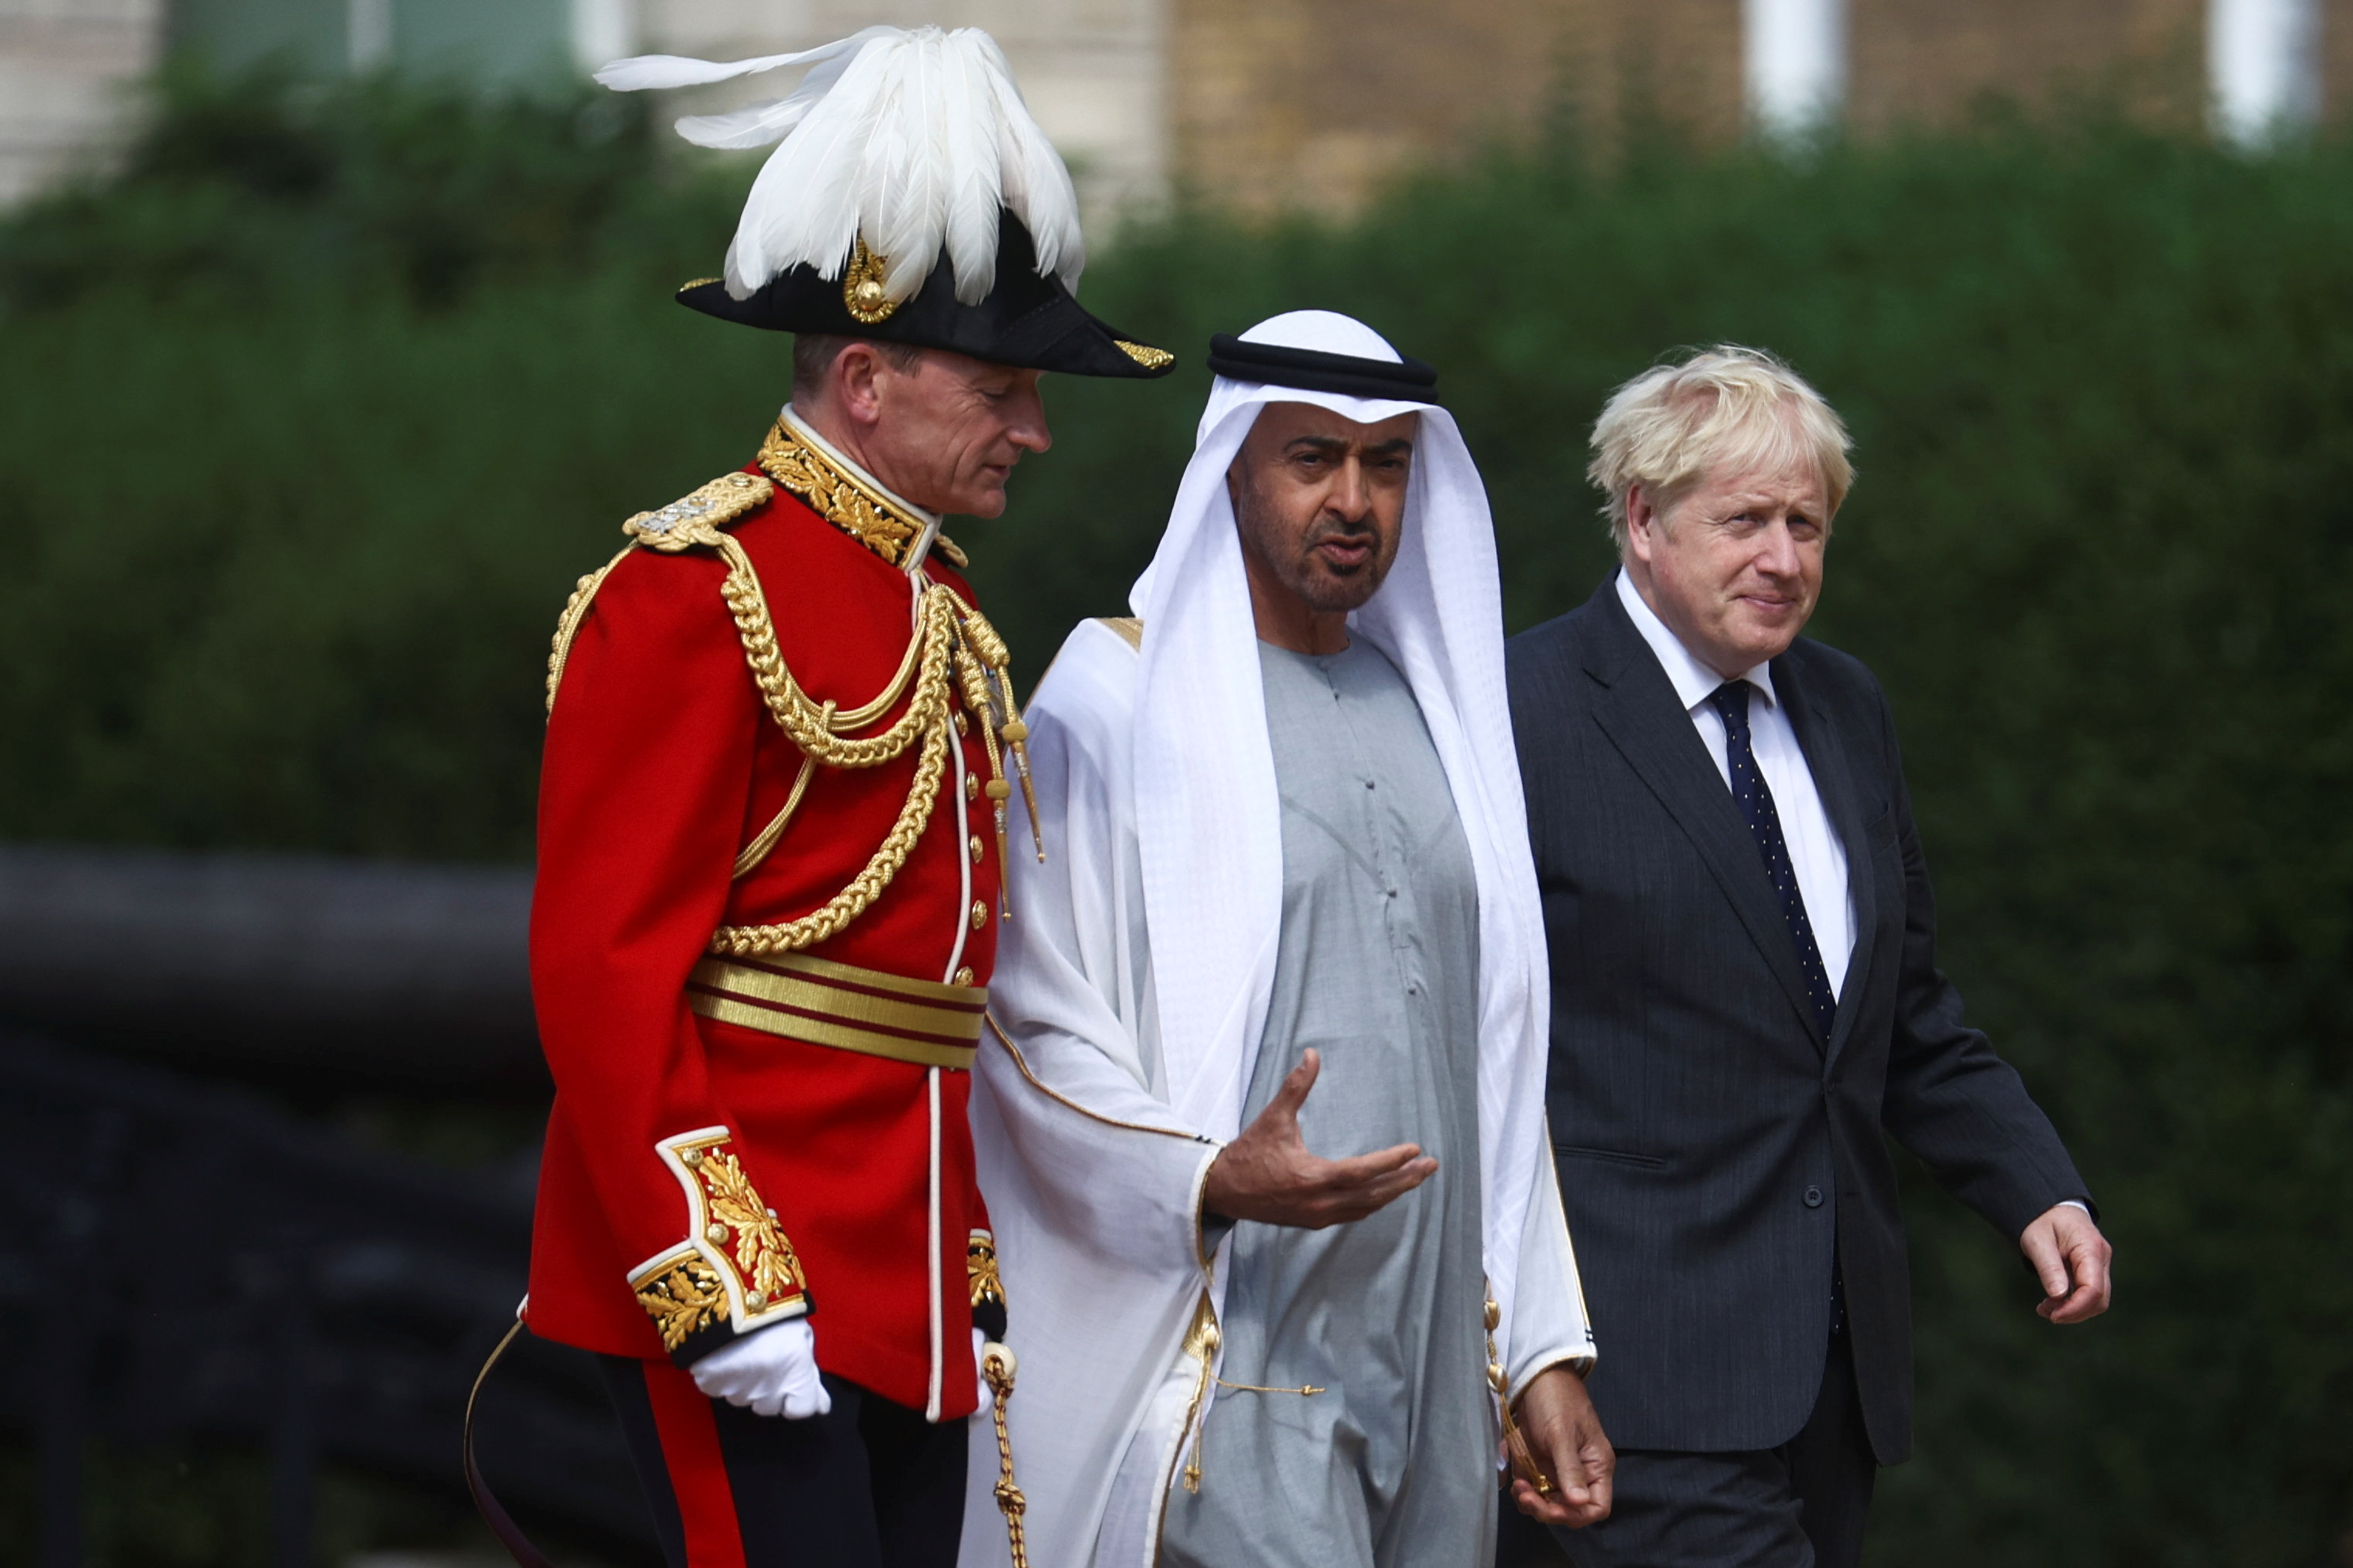 Boris Johnson and the Crown Prince of Abu Dhabi inspect the Guard of Honour in London